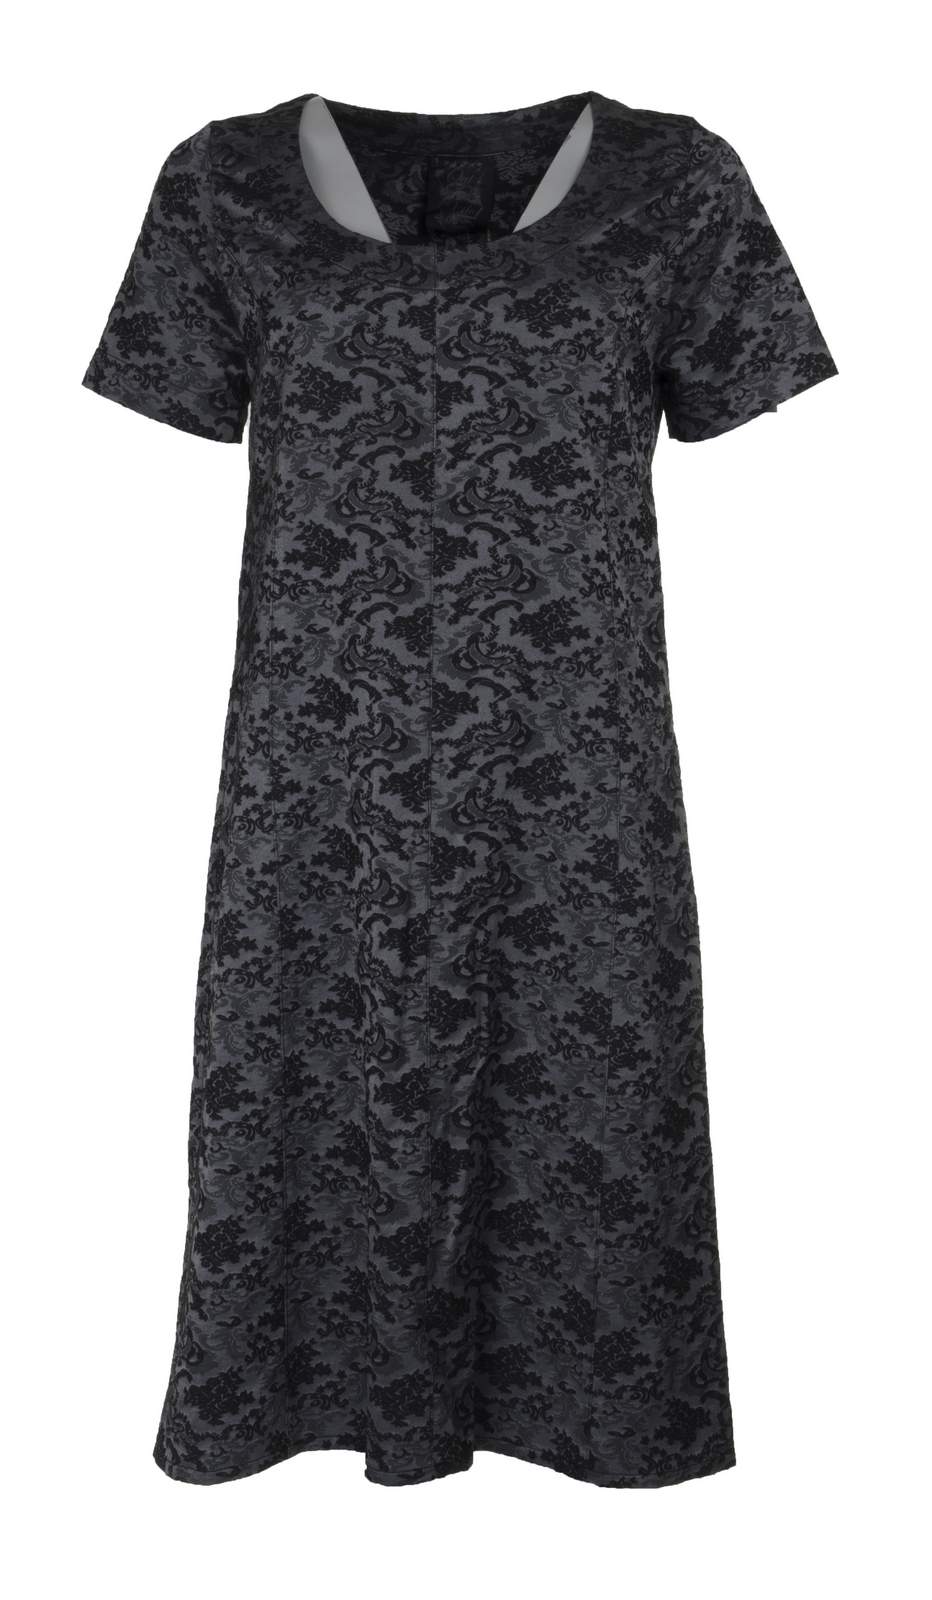 Out of Xile Floransa Dress Black